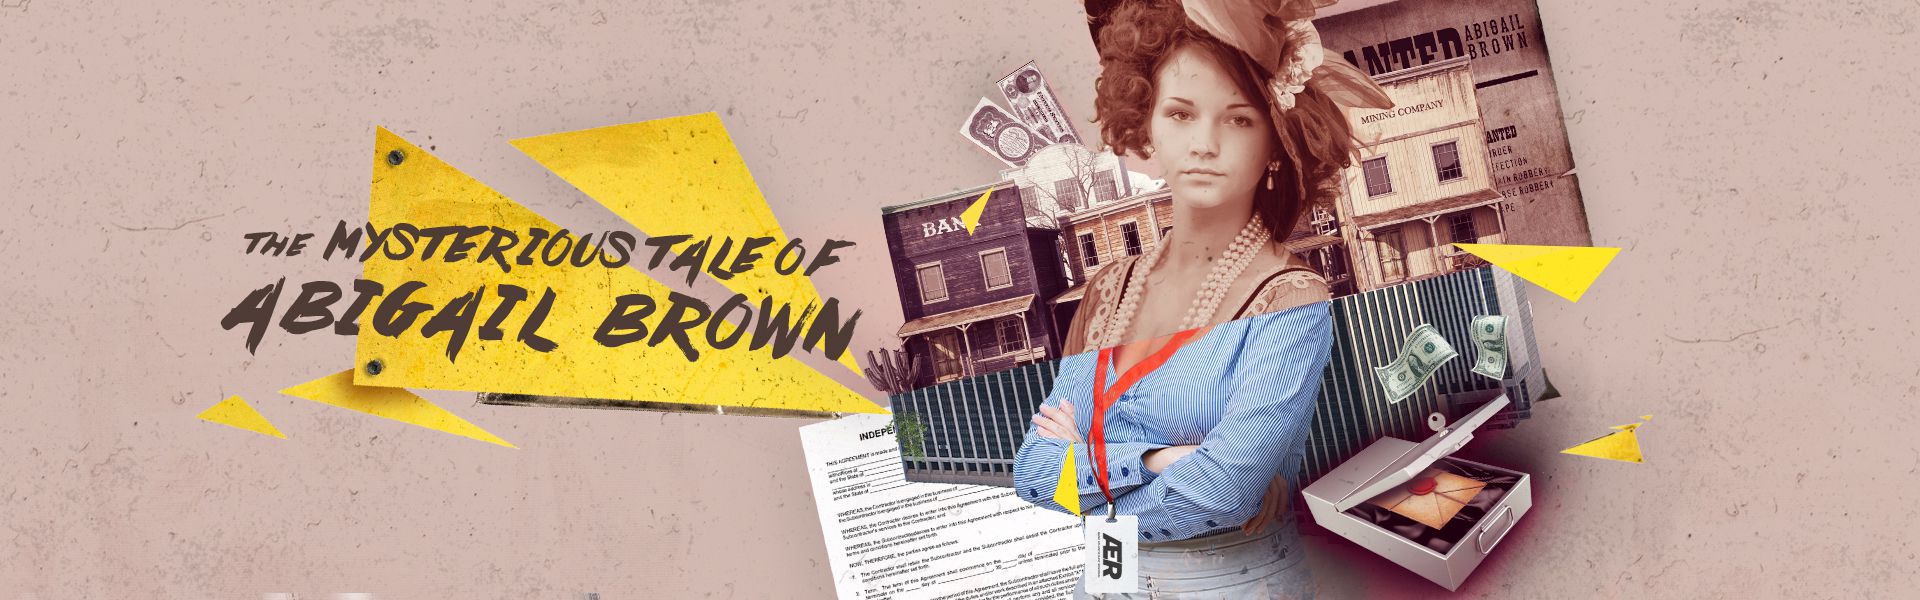  the mysterious tale of Abigail Brown escape room illustration at American Escape Rooms